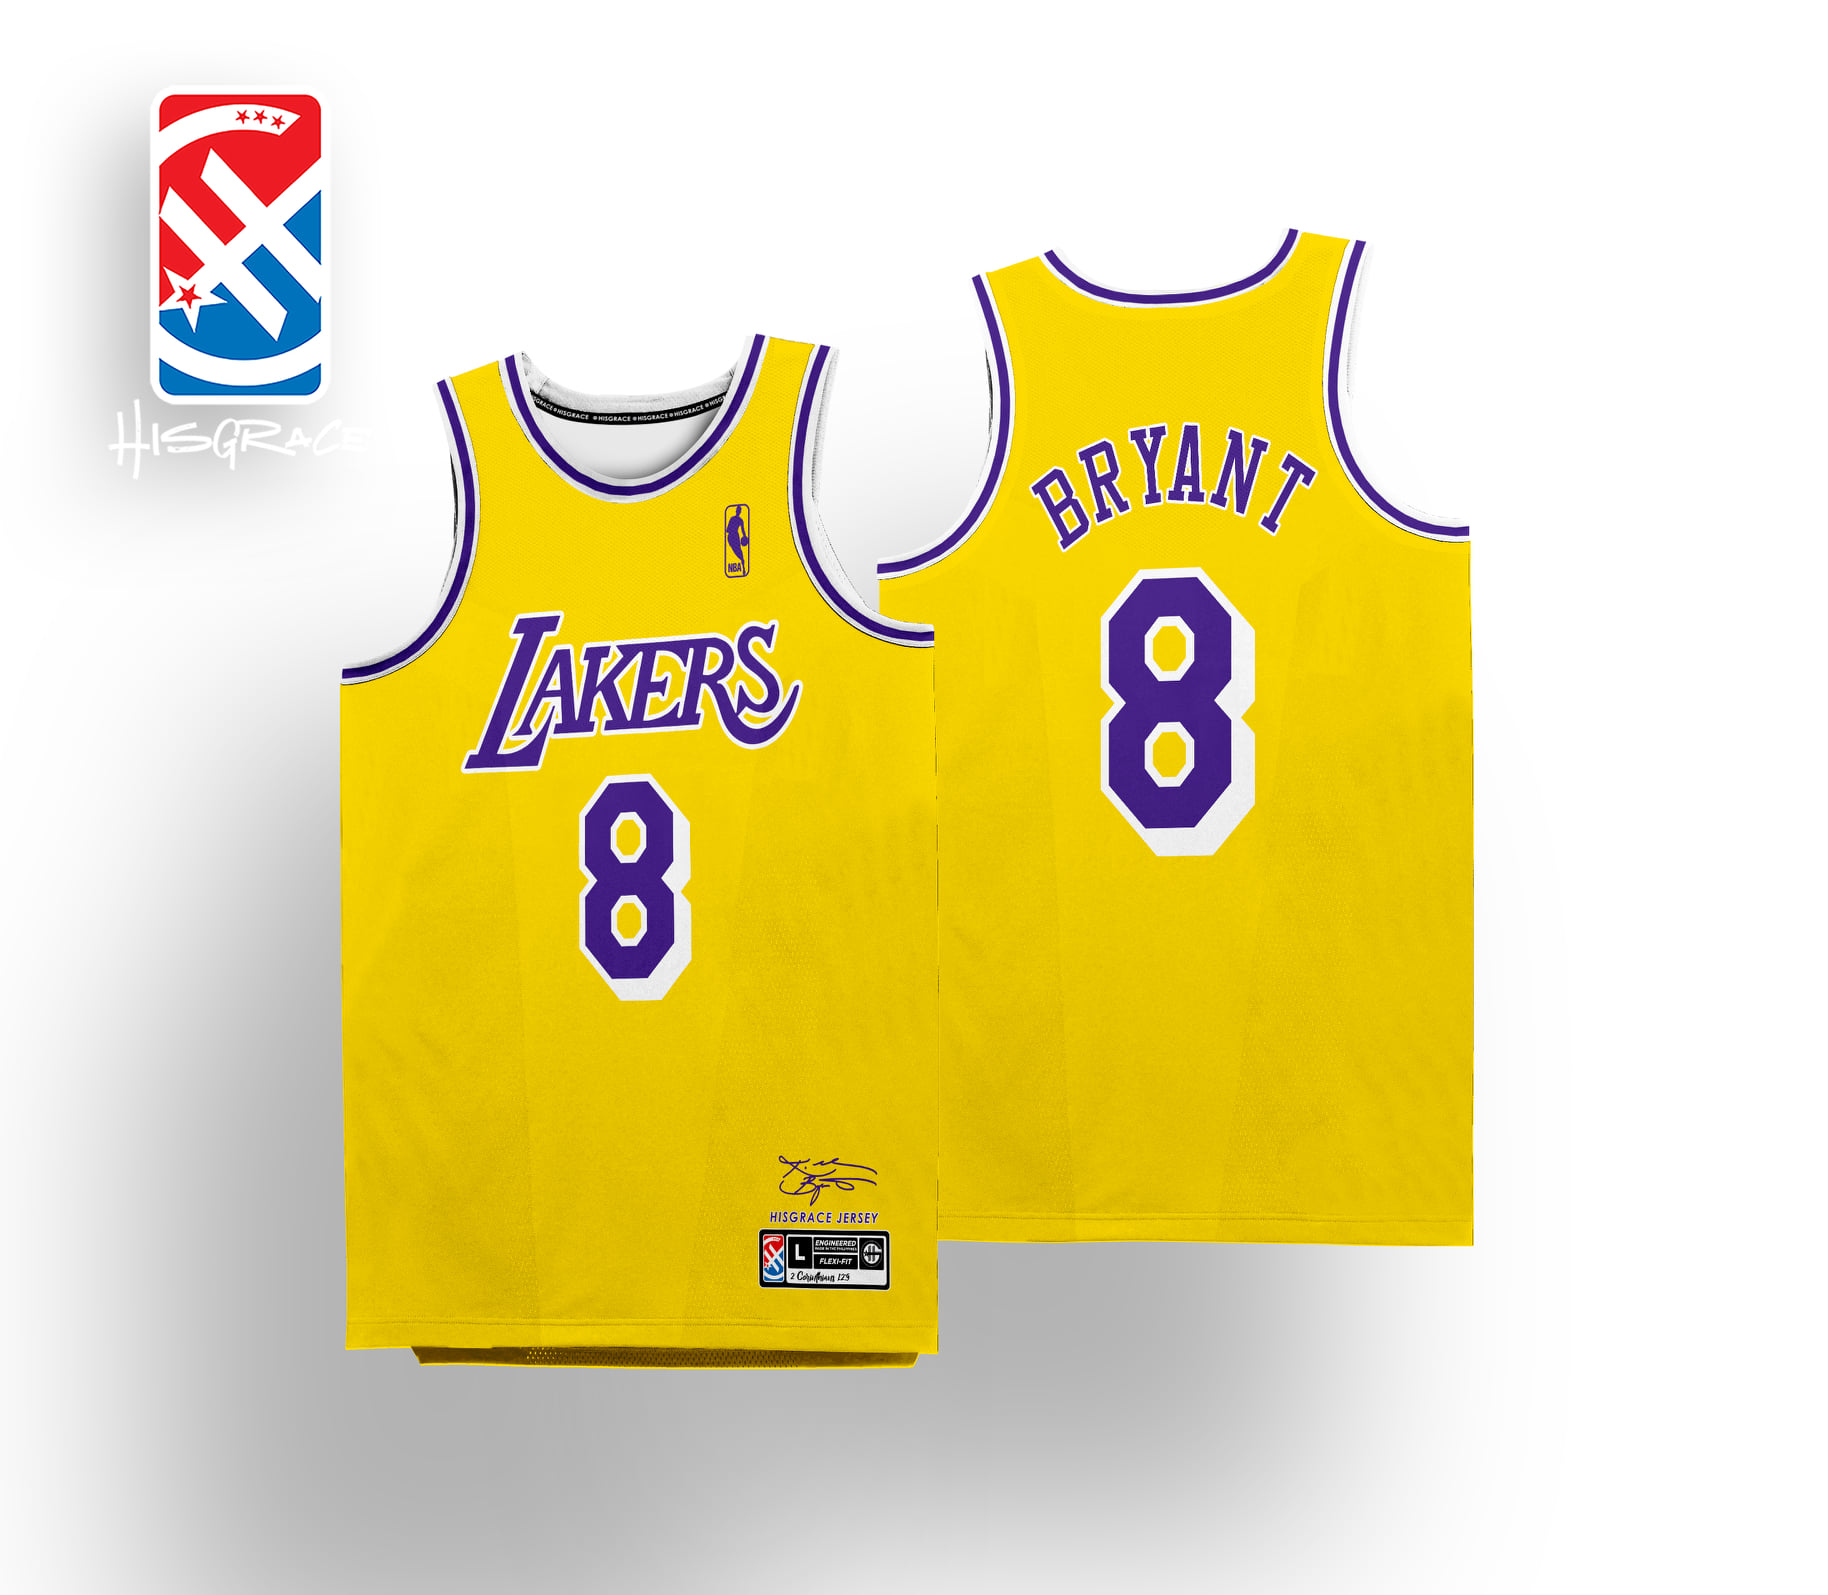 LOS ANGELES LAKERS × BAPE YELLOW - HIGH QUALITY FULL SUBLIMATION